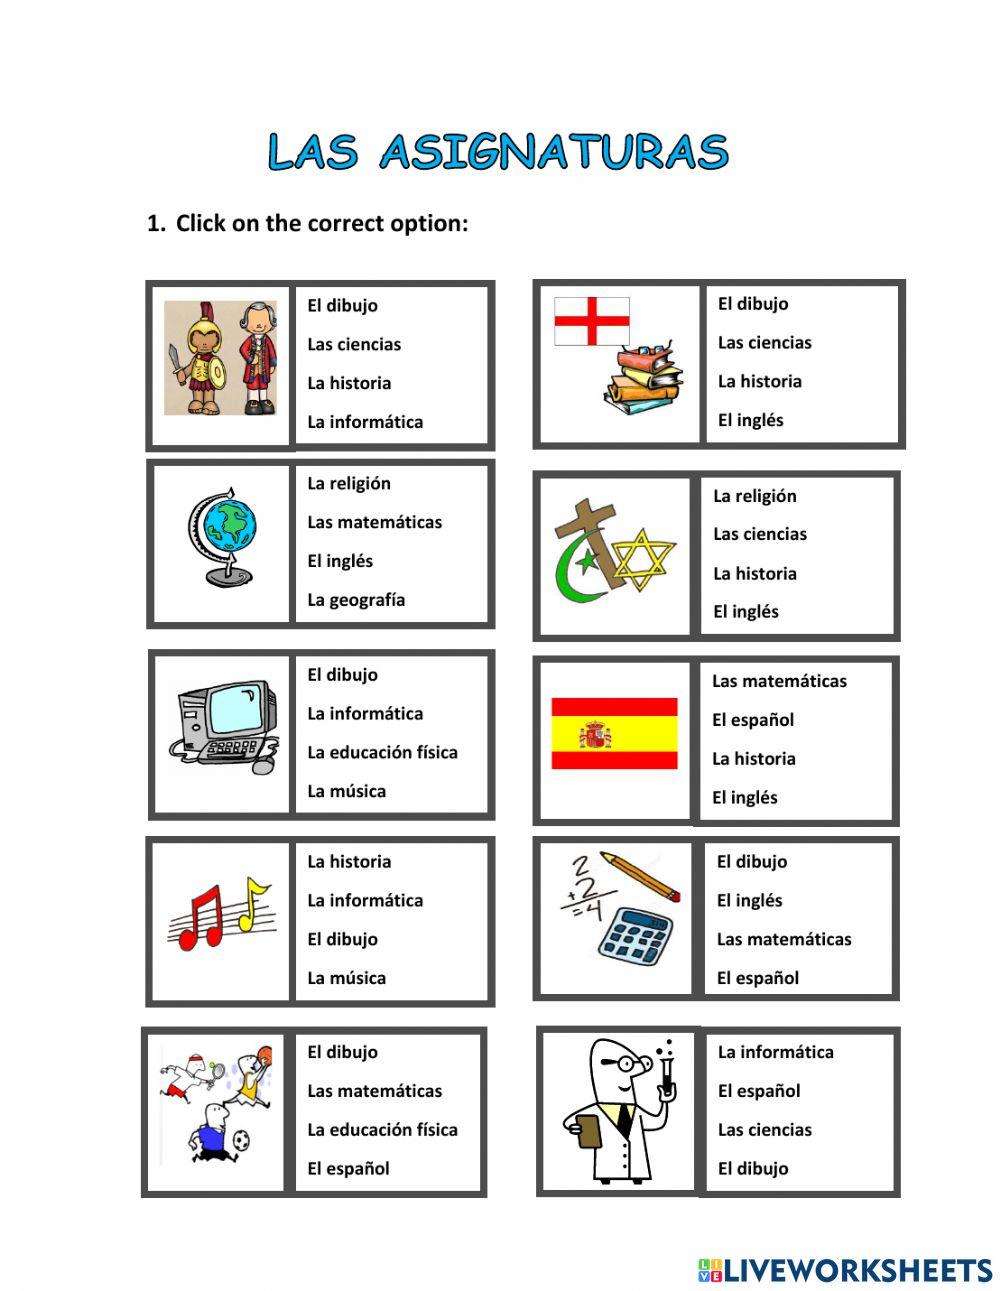 Las asignaturas online exercise for | Live Worksheets